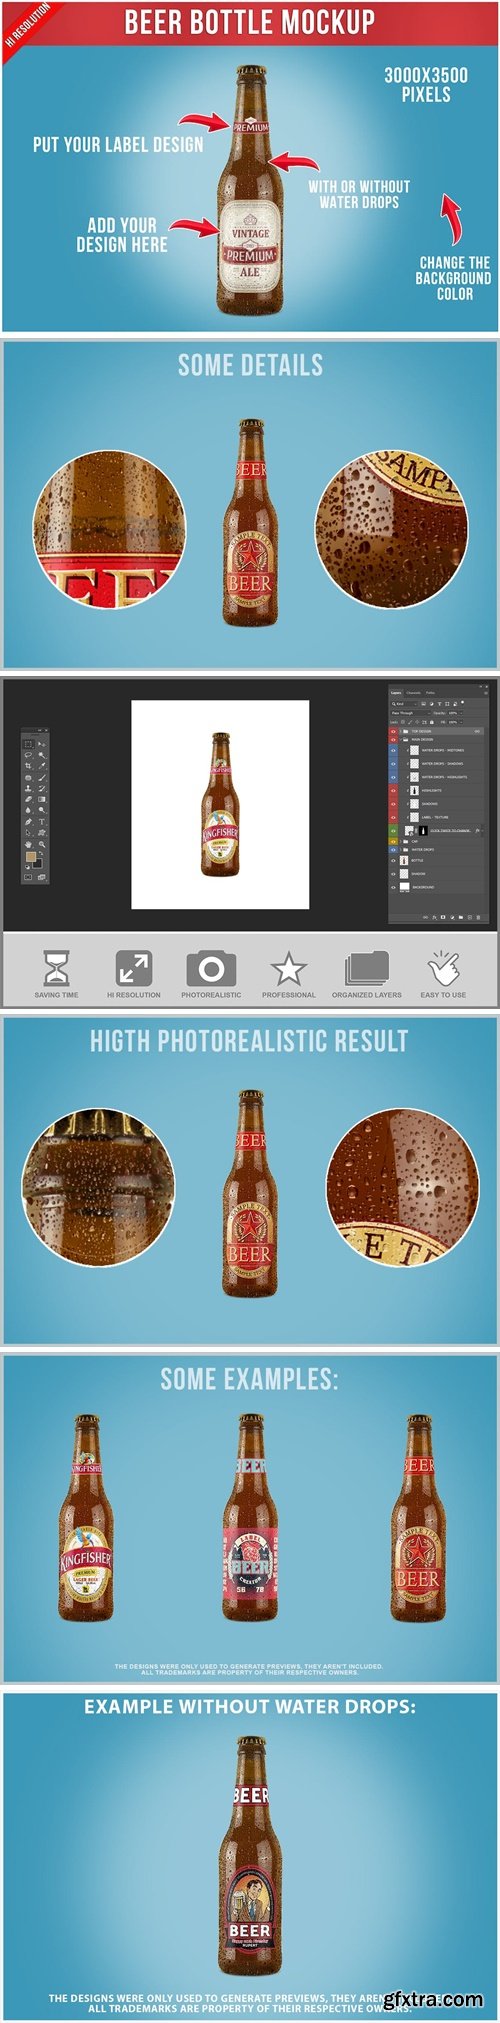 Beer Bottle Mockup with Water Drops Template PQGZE5B